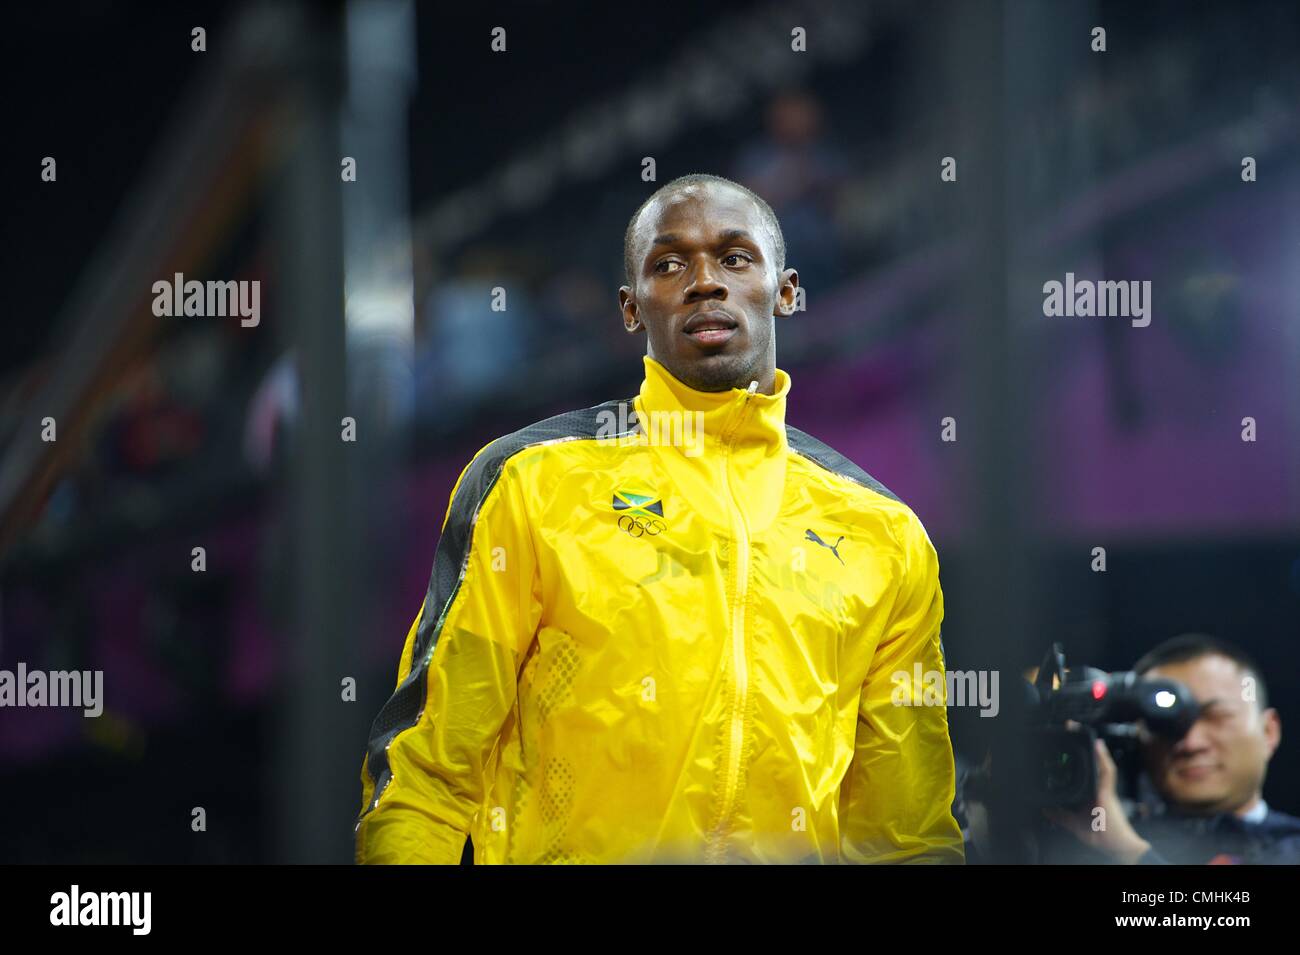 Aug. 11, 2012 - London, England, United Kingdom - USAIN BOLT and the other members of his Jamaican 4x100m relay team are interviewed by the media after winning gold and setting a new world record of 36.84 seconds during the 2012 London Summer Olympics. (Credit Image: © Mark Makela/ZUMAPRESS.com) Stock Photo